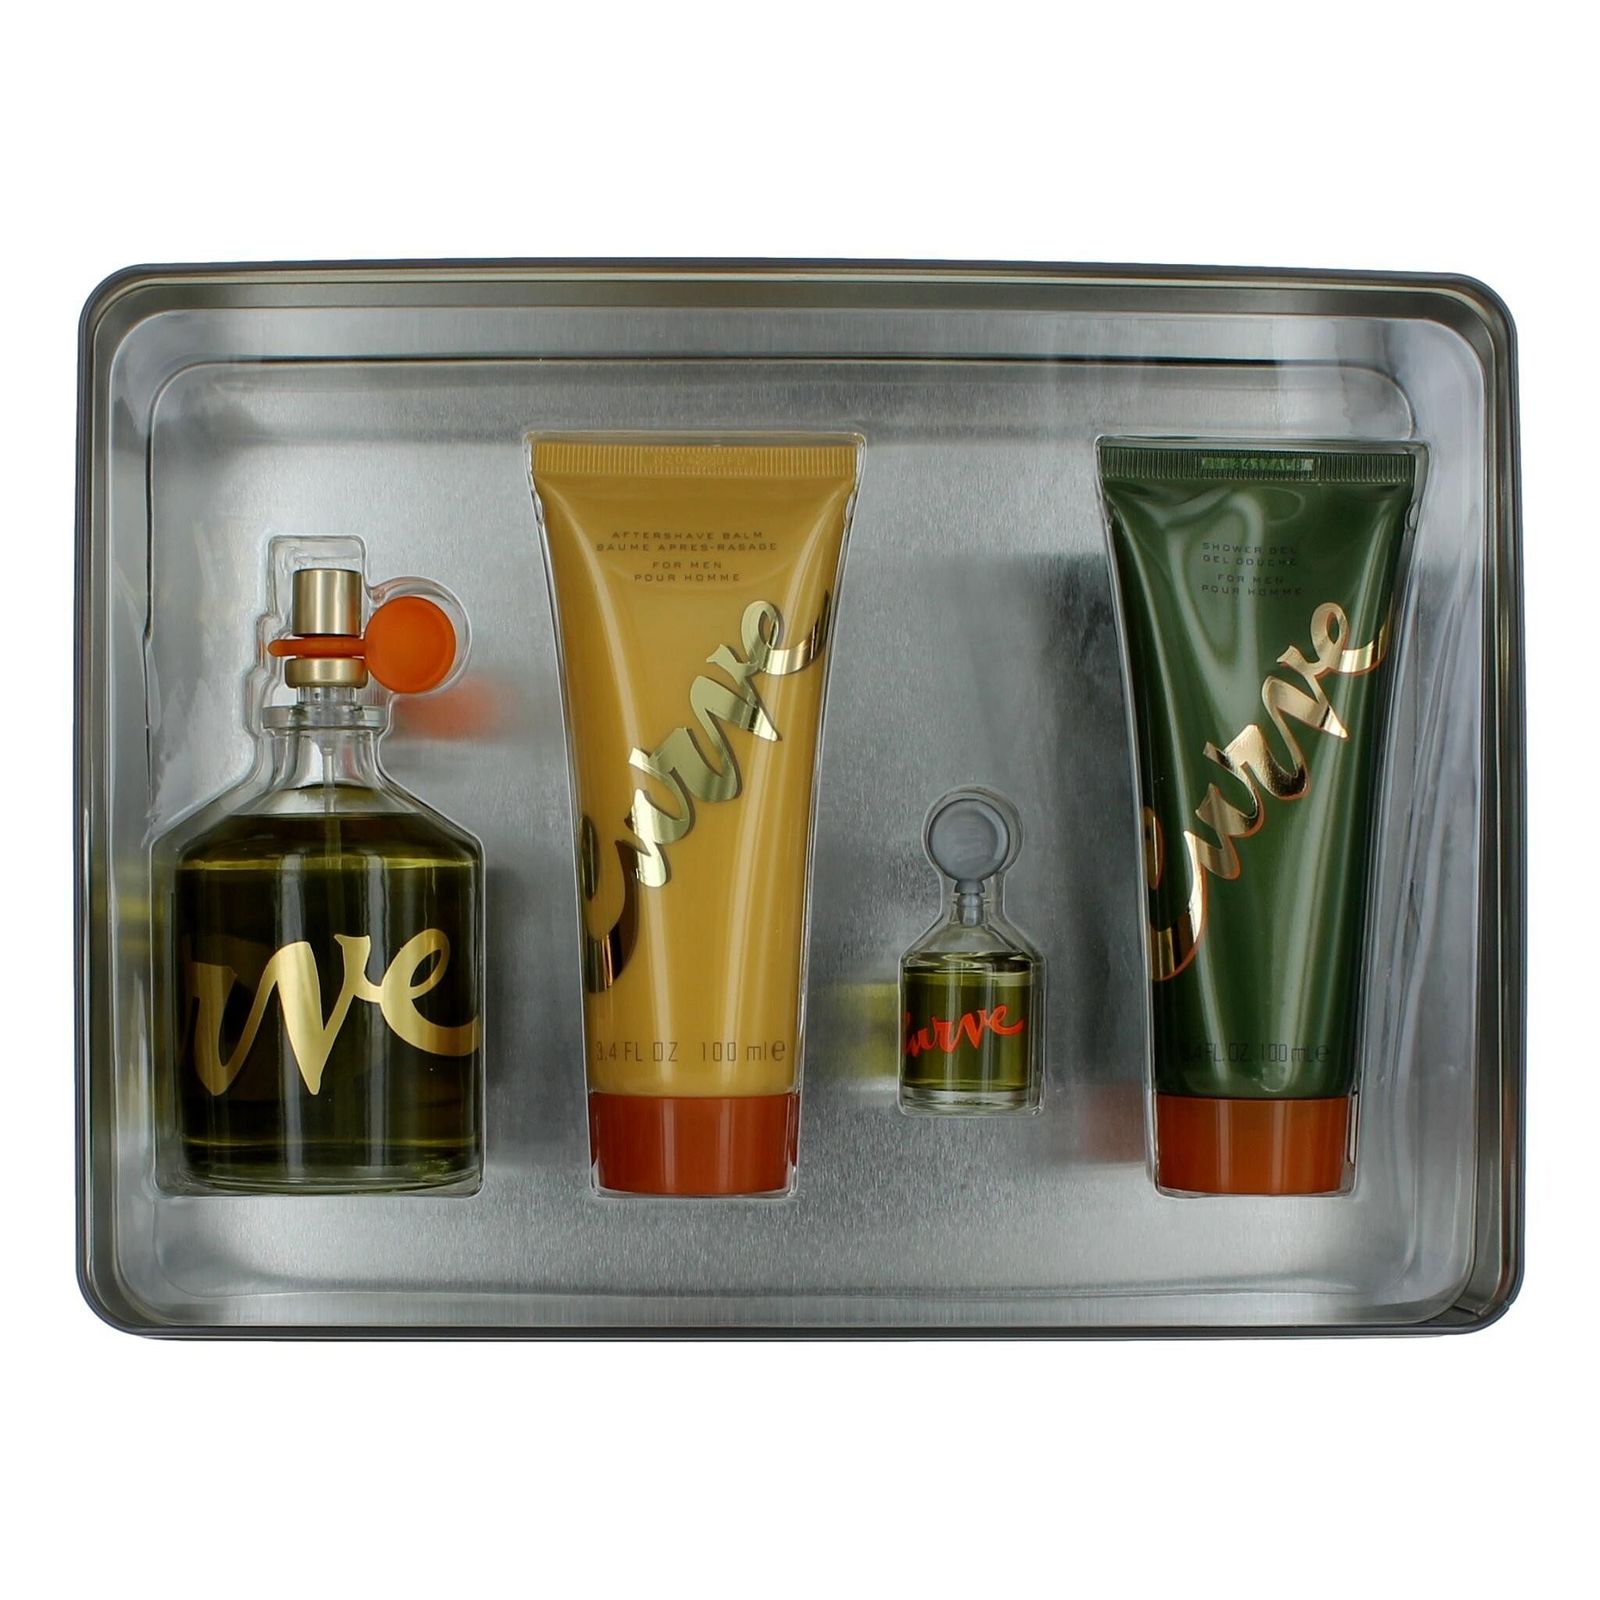 Curve by Liz Claiborne, 4 Piece Gift Set for Men with 4.2 oz In A Tin Box - $66.72